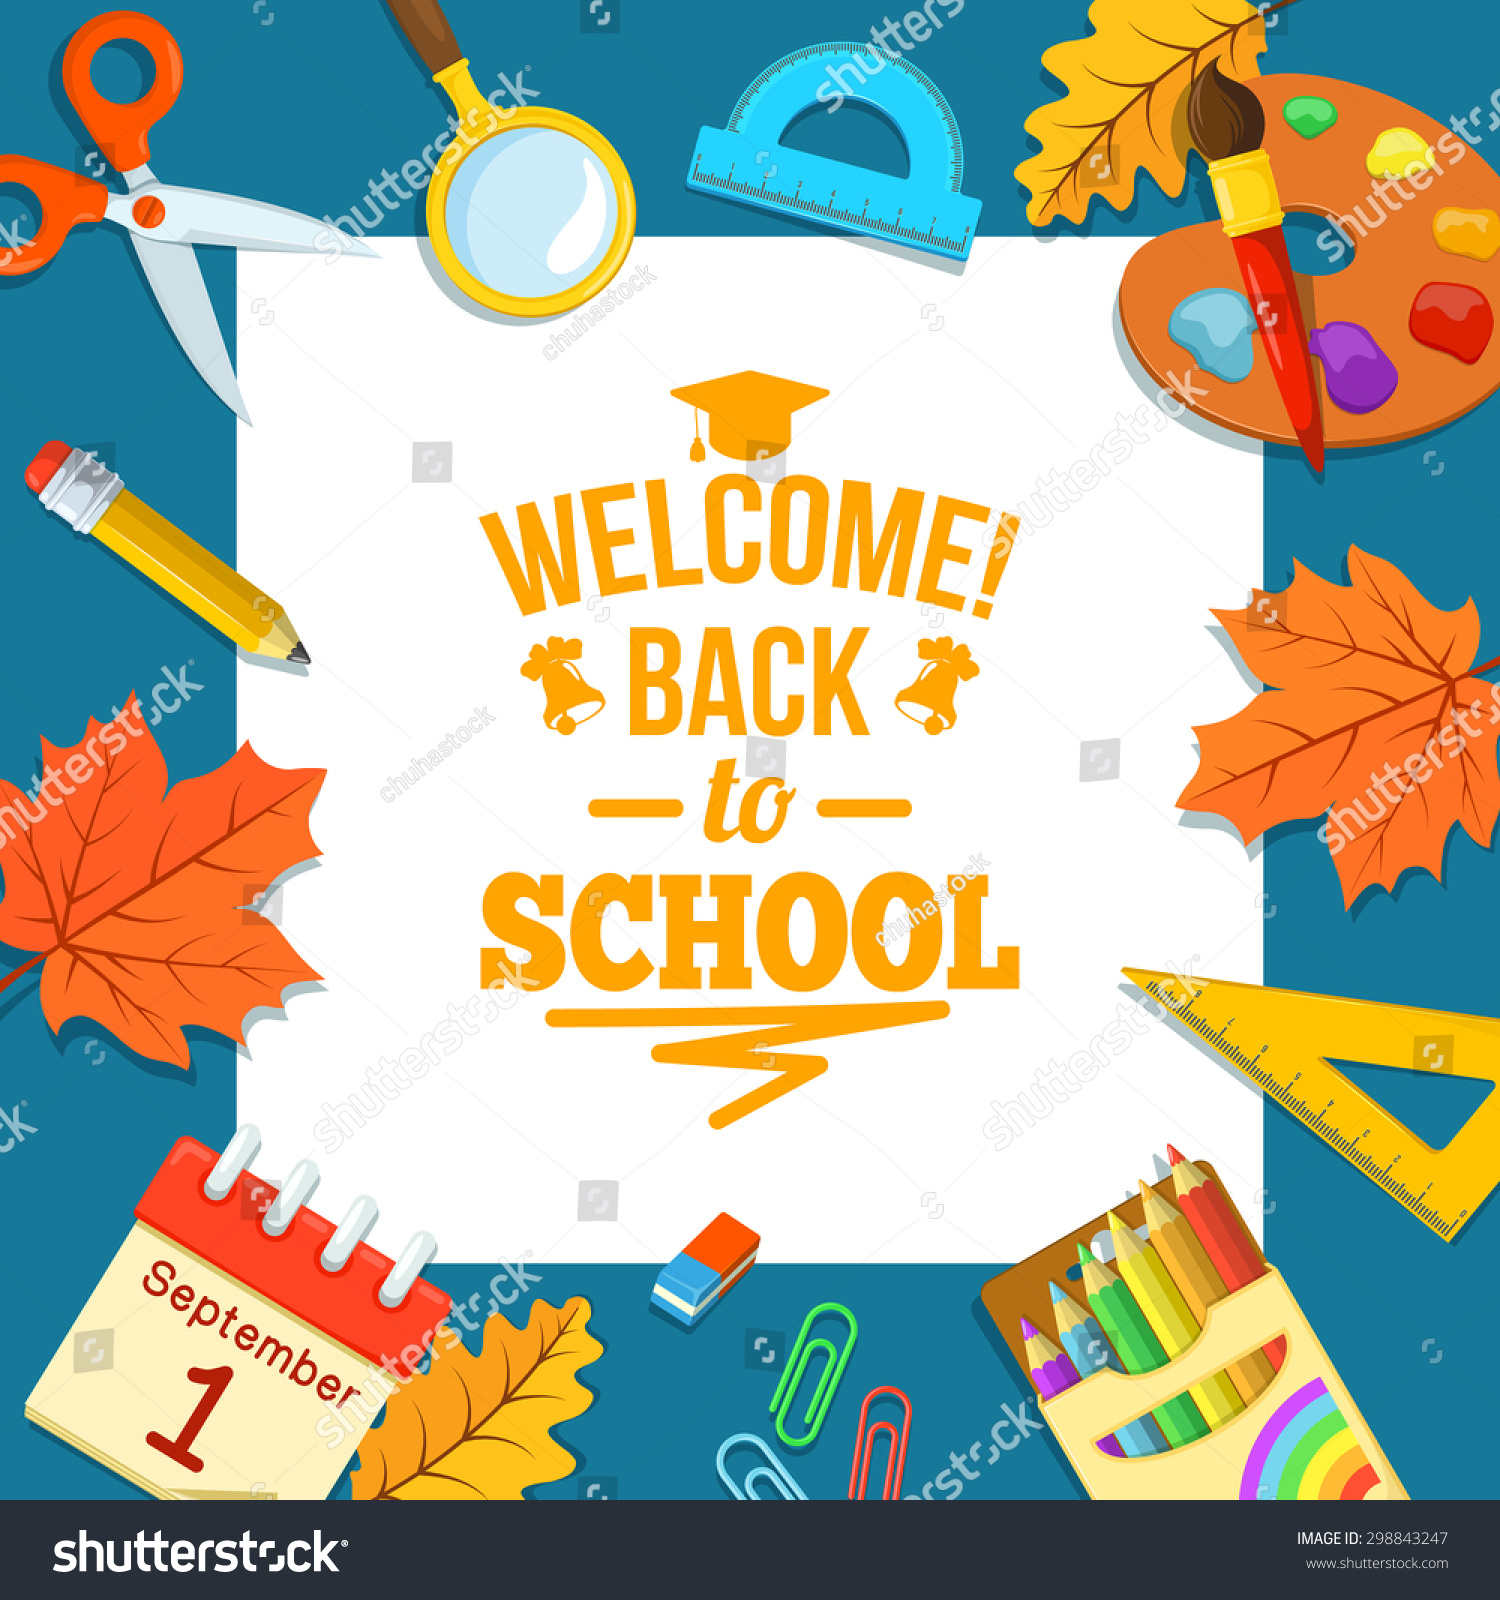 Welcome Back School Education Background Design Stock Vector Royalty Free